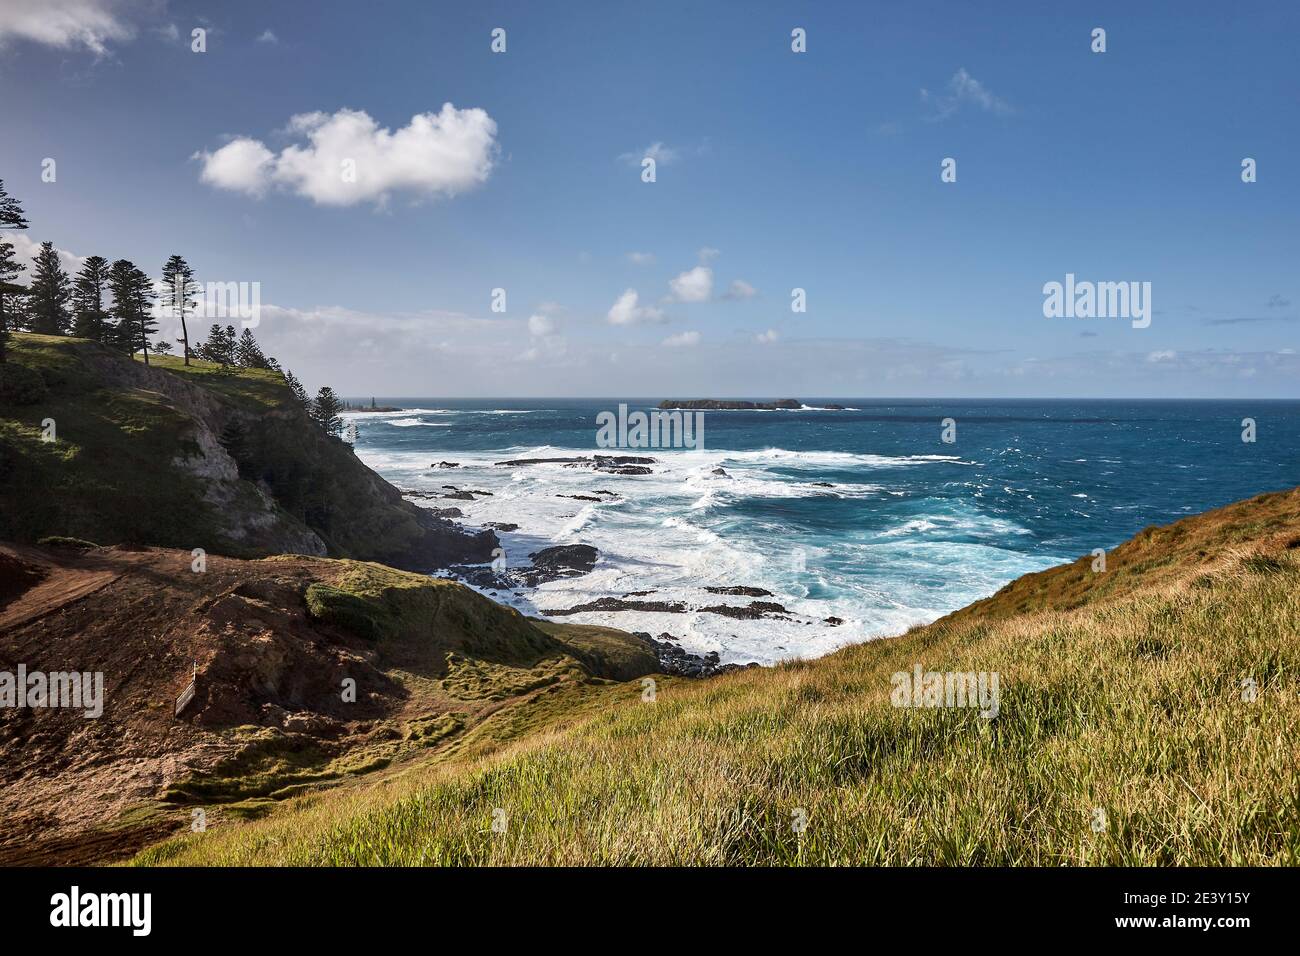 View from Slaughters Bay out to the Pacific Ocean on a bright and sunny winters day with Norfolk Pine trees on the cliff edges, Norfolk Island Stock Photo